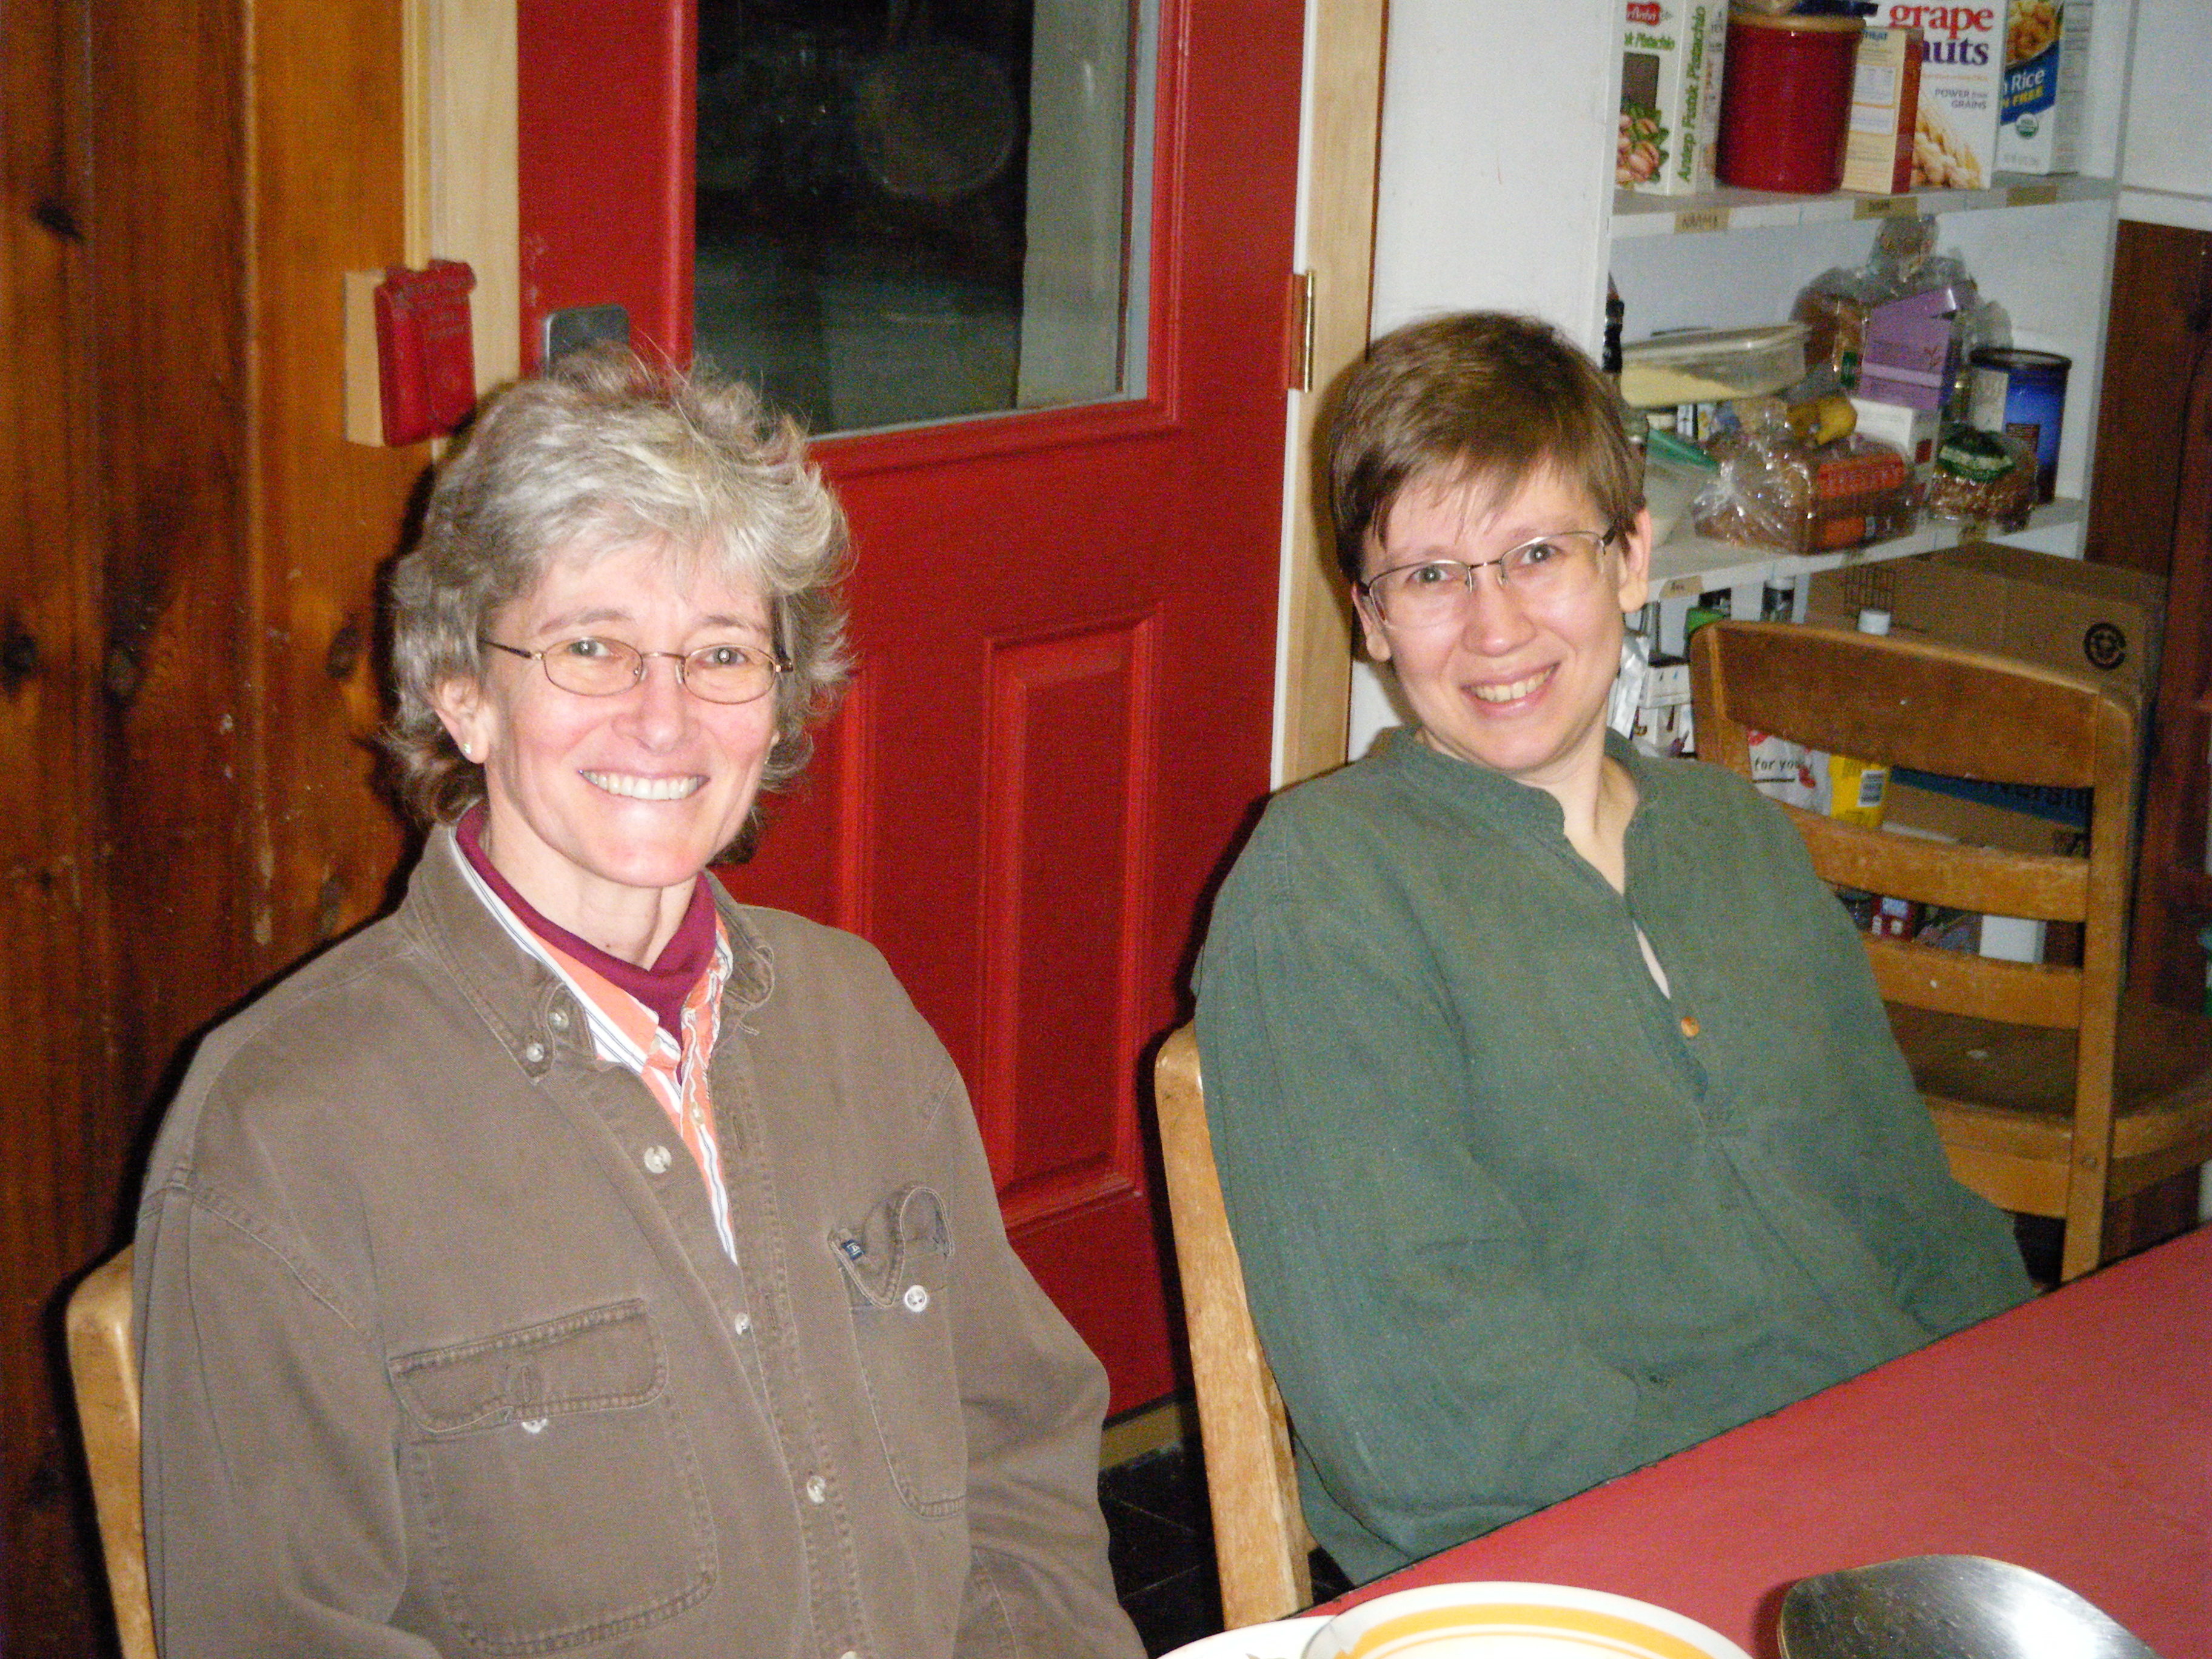 A Summiteer and her guest sit at the dining room table